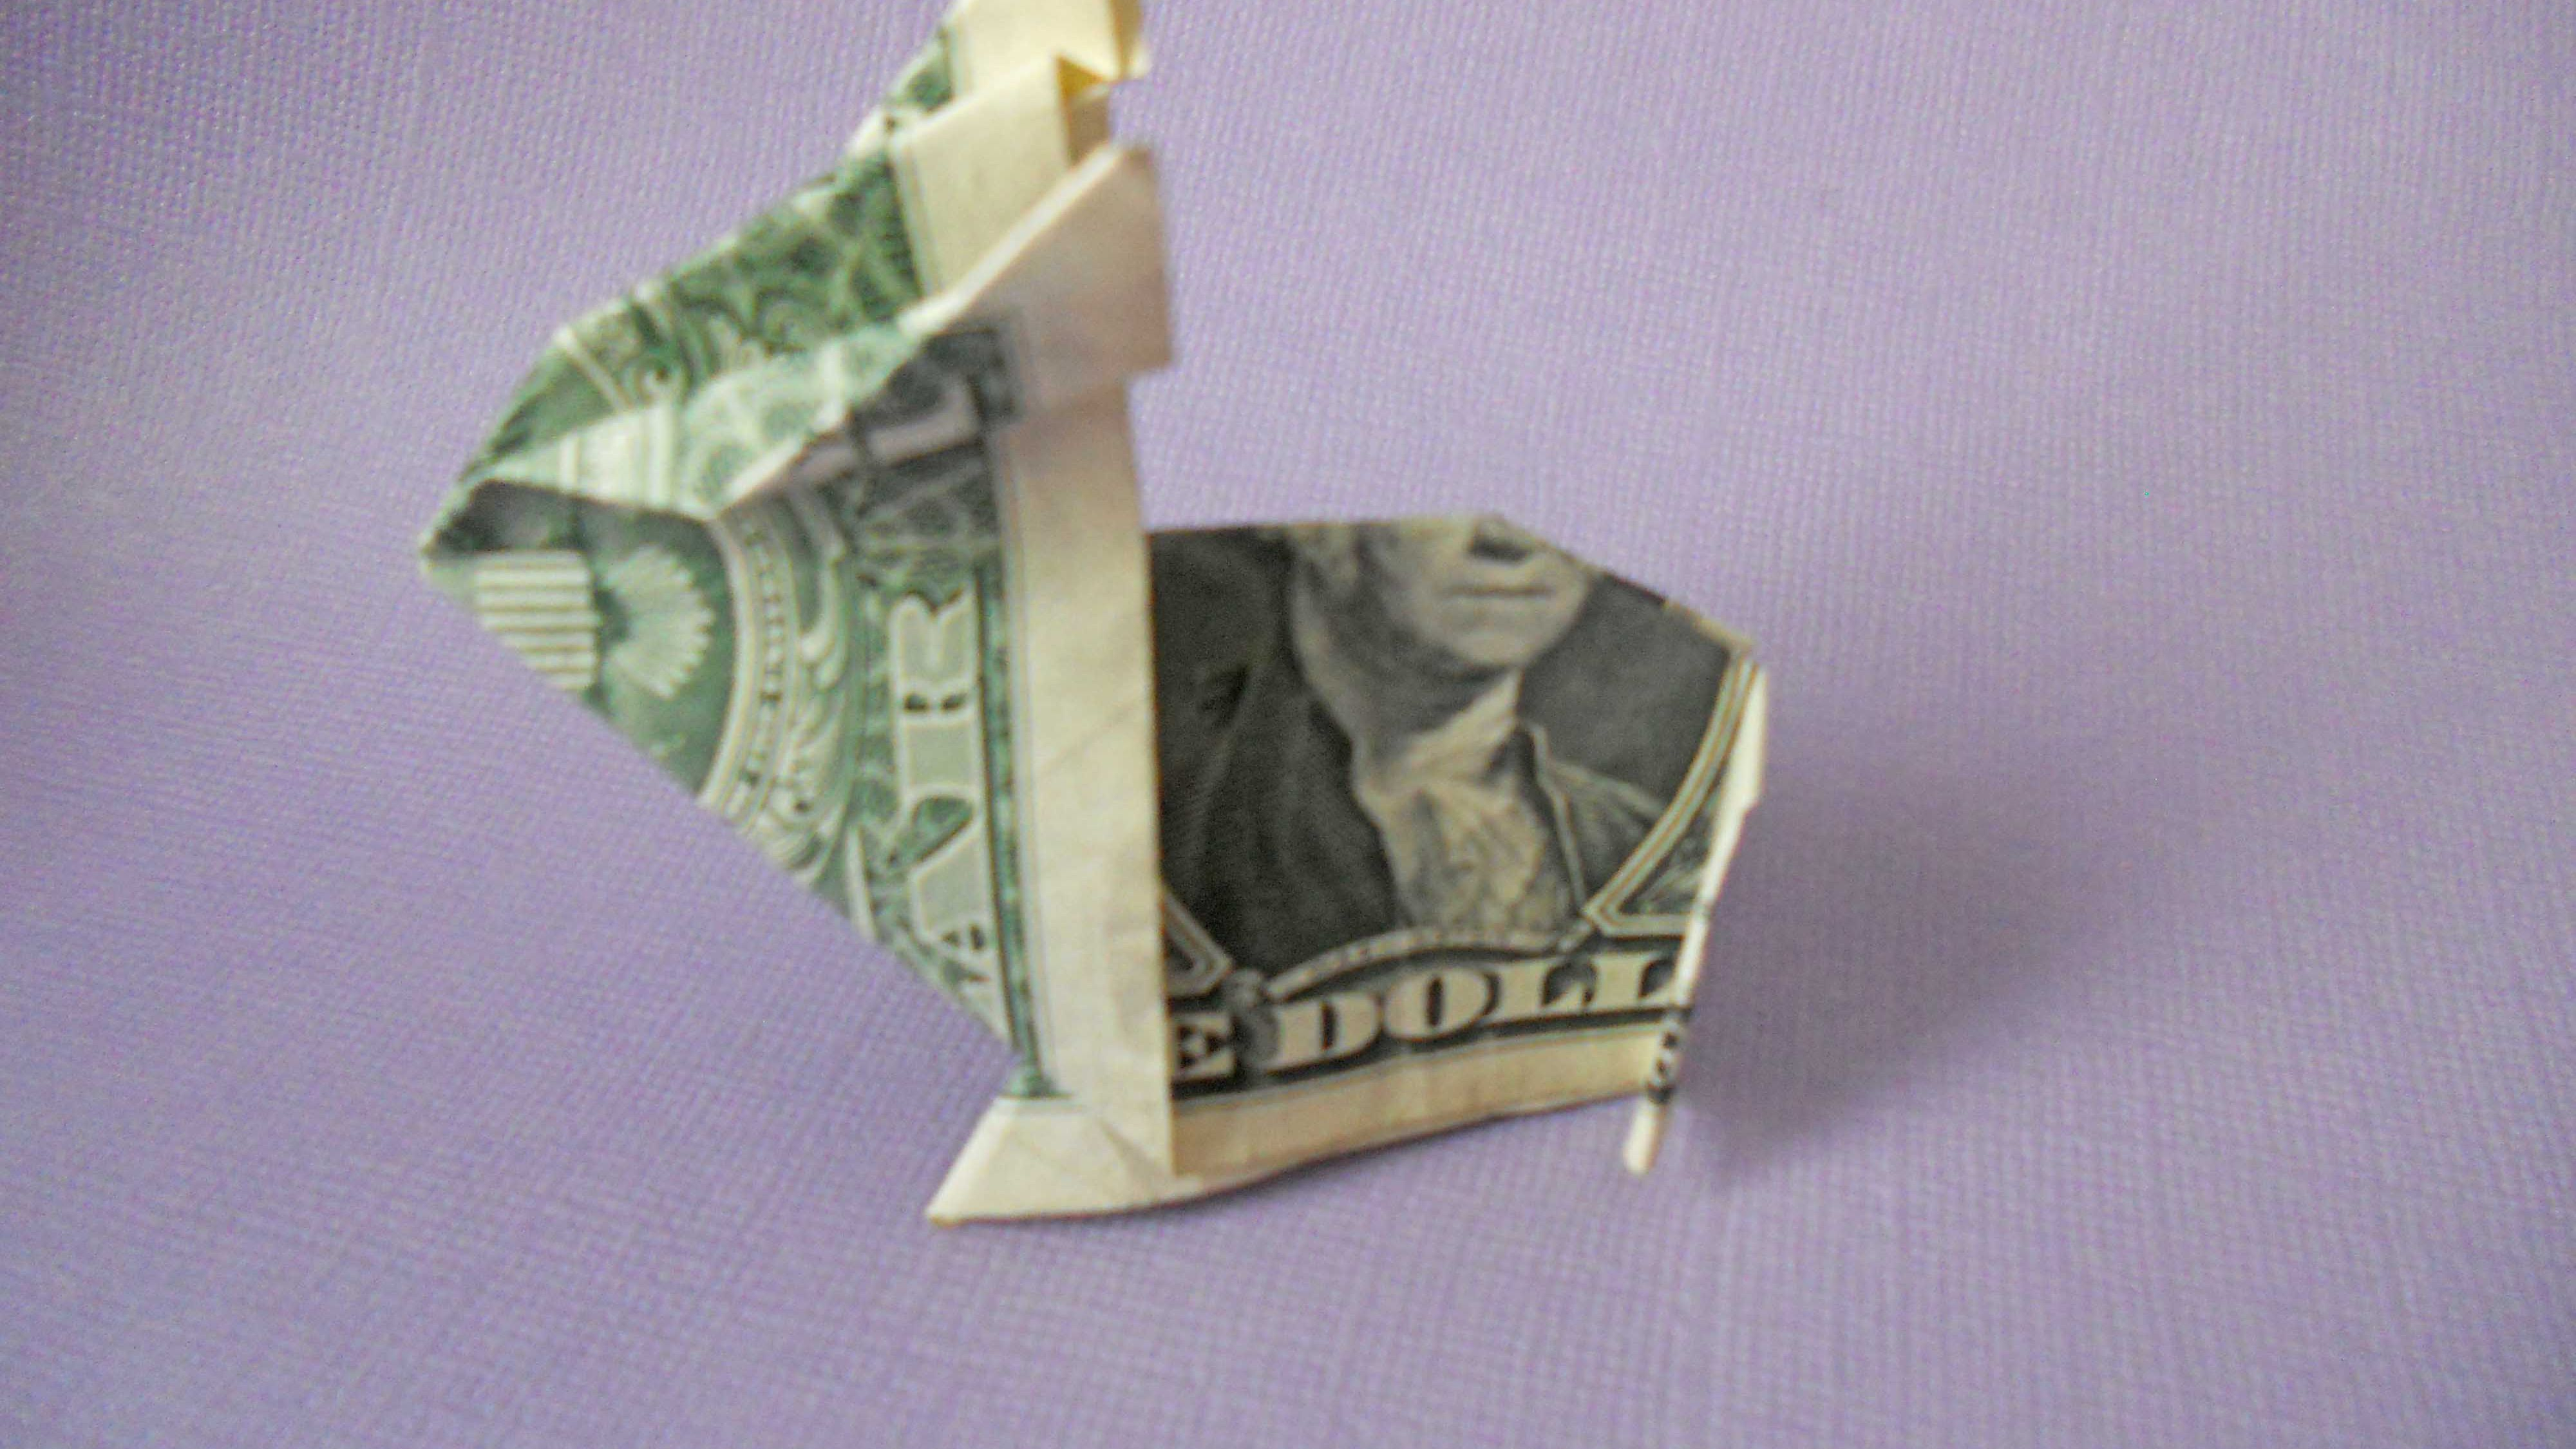 Money Origami Steps How To Make A Crafty Origami Bunny Out Of Cash